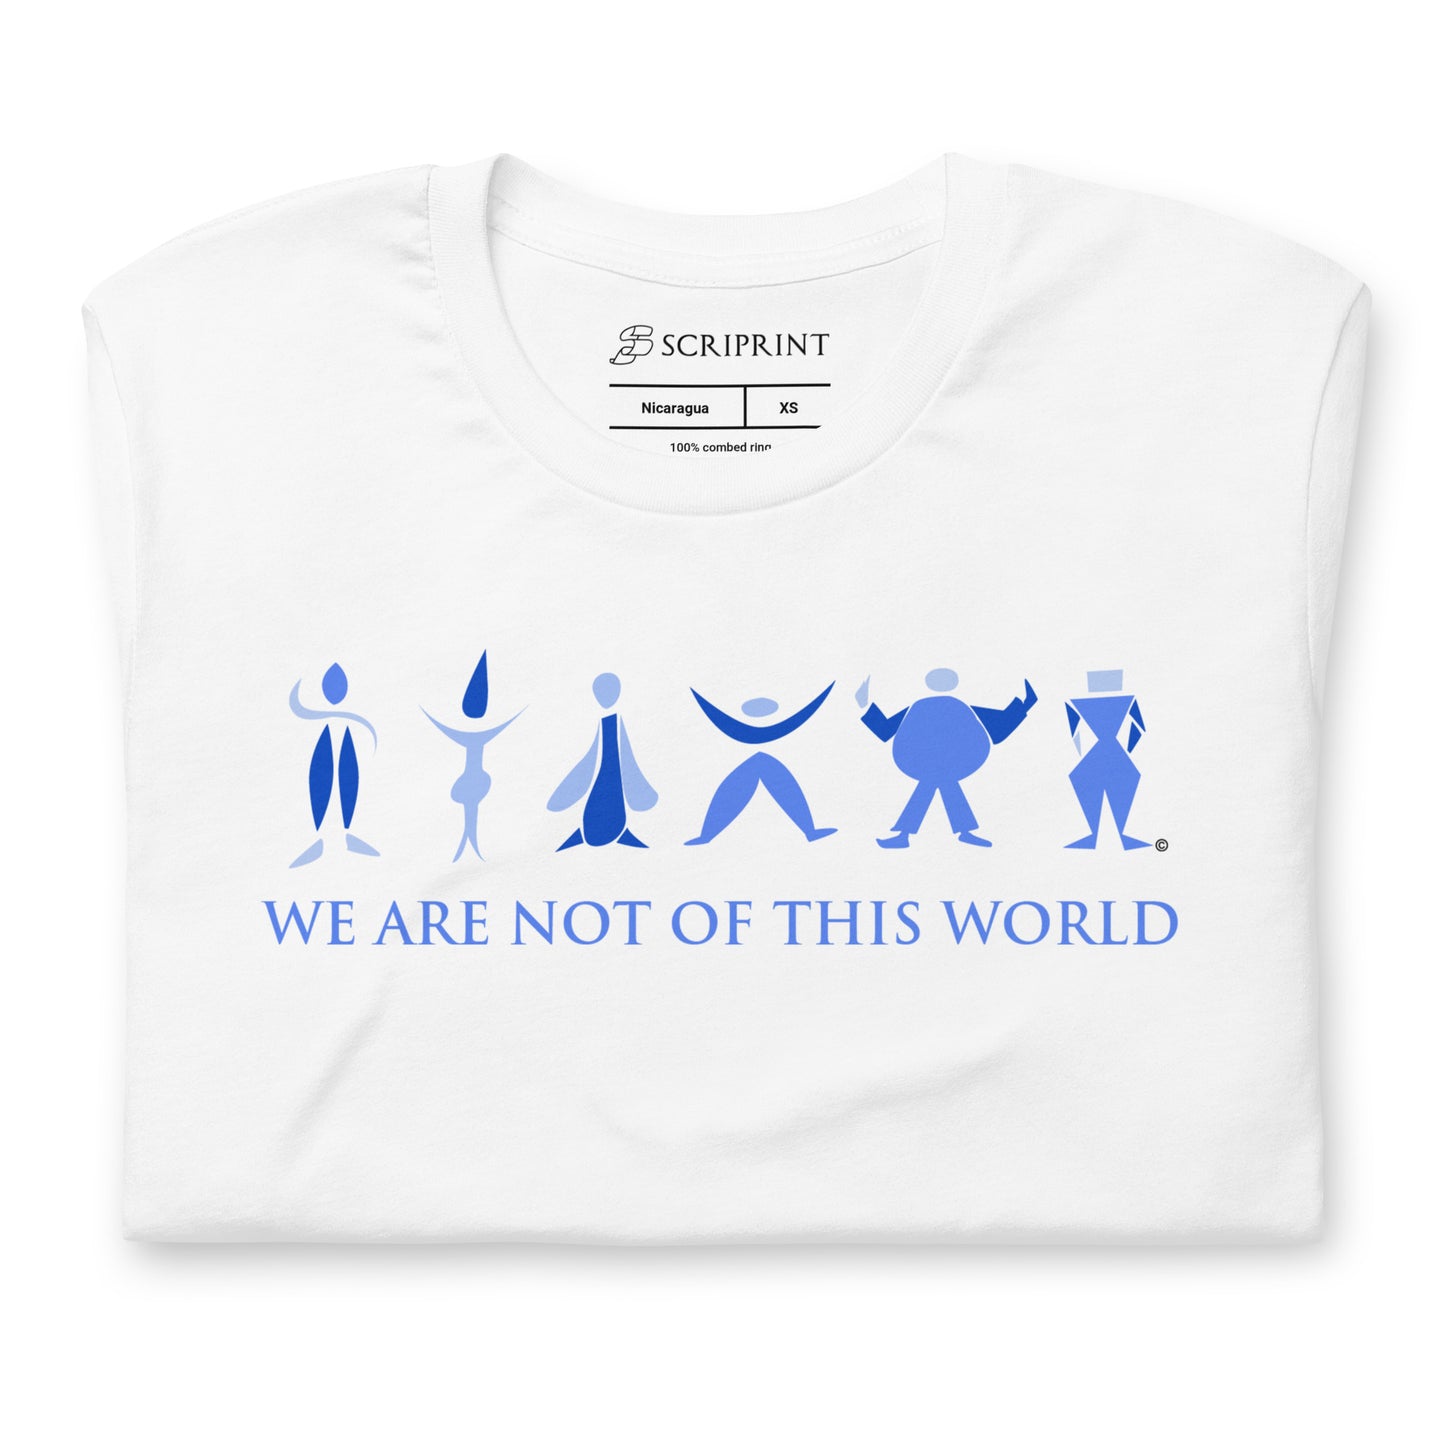 We Are Not of This World Women's T-Shirt